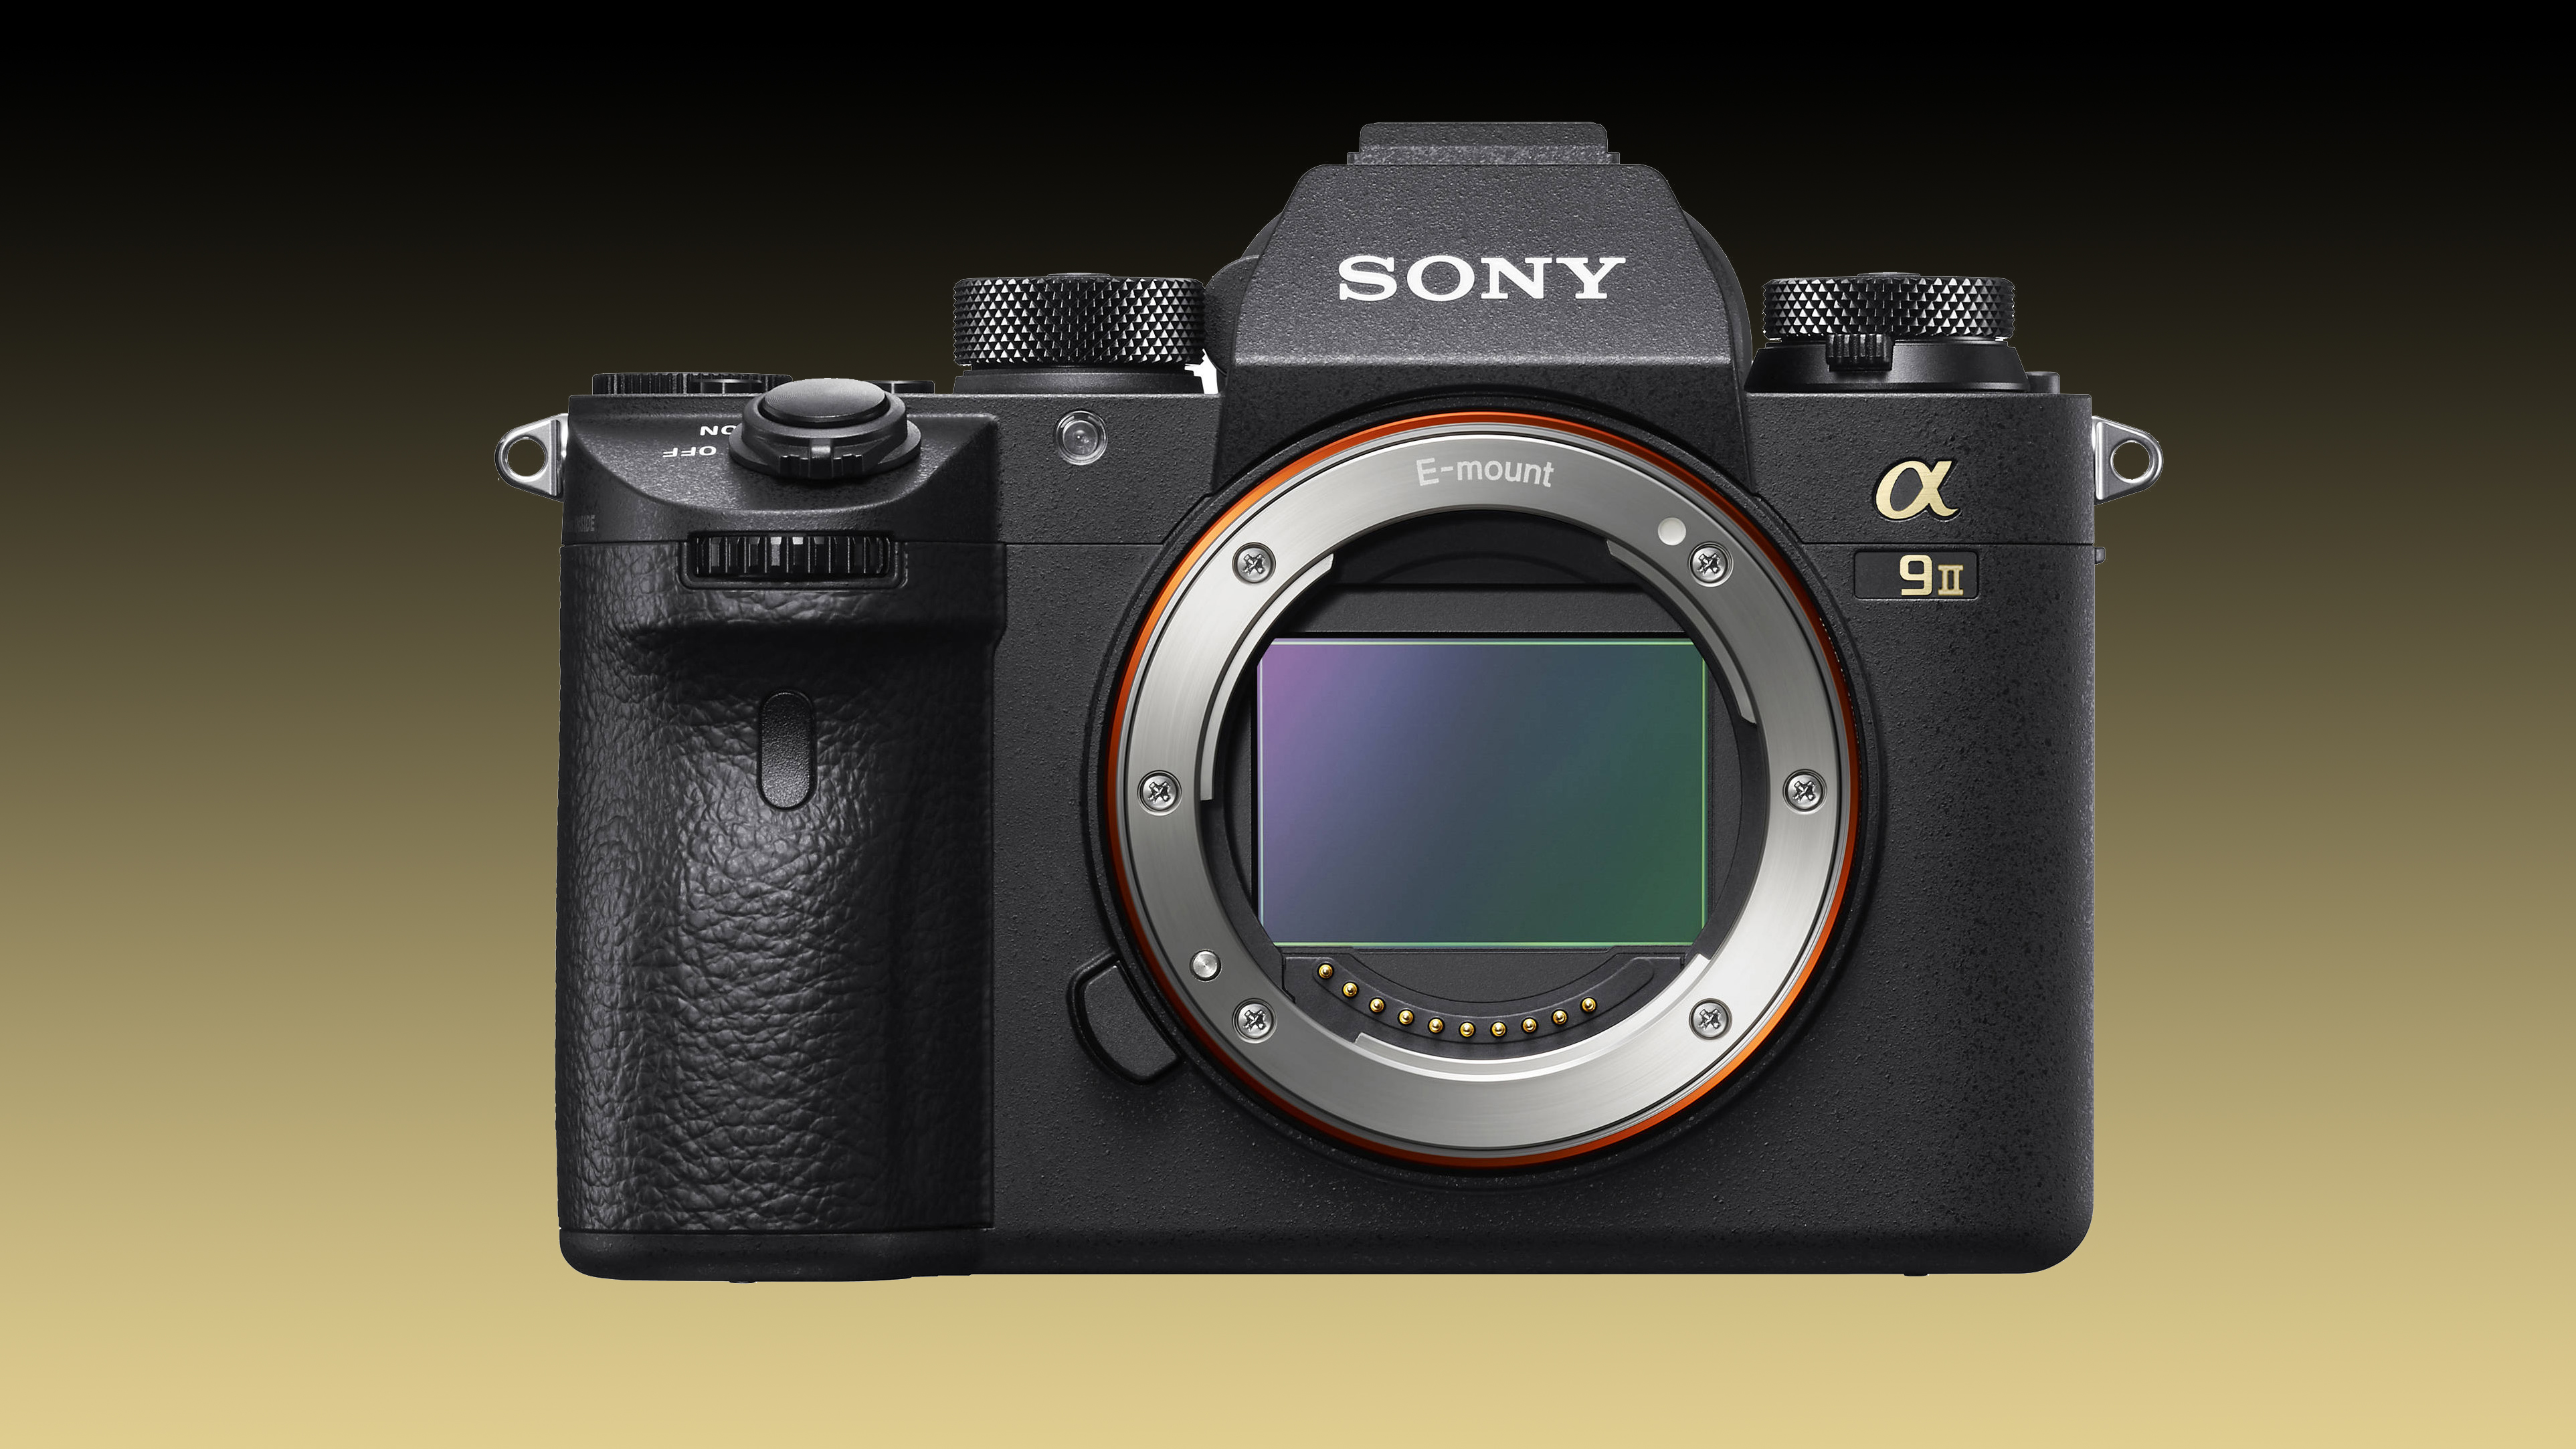 Sony A9 II image and price leak is 36MP really worth 5,000? Digital